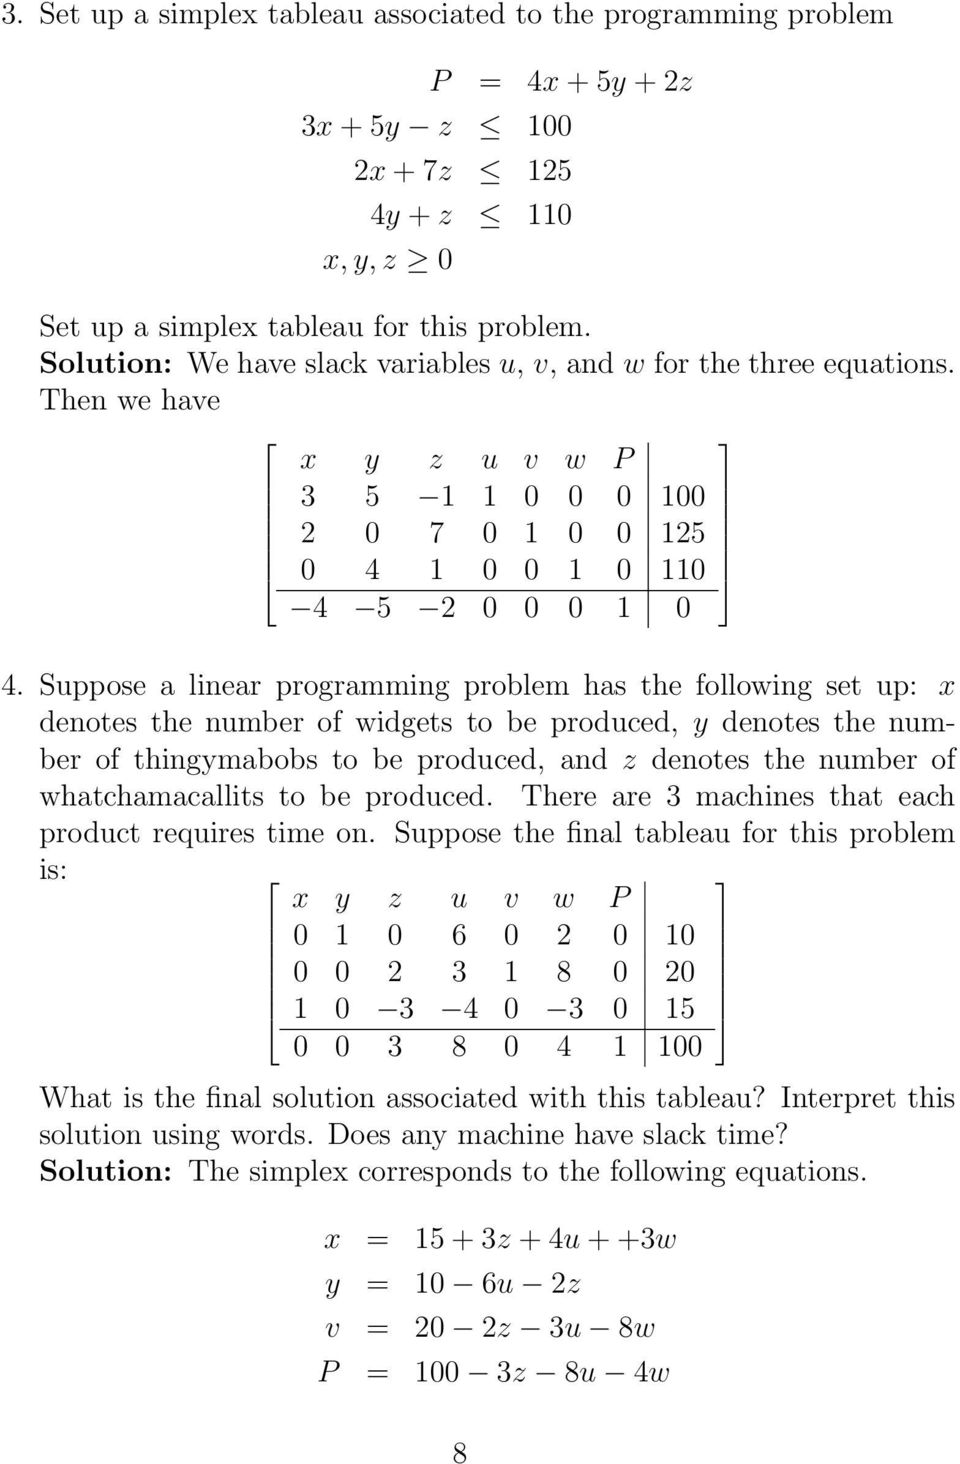 Suppose a linear programming problem has the following set up: x denotes the number of widgets to be produced, y denotes the number of thingymabobs to be produced, and z denotes the number of